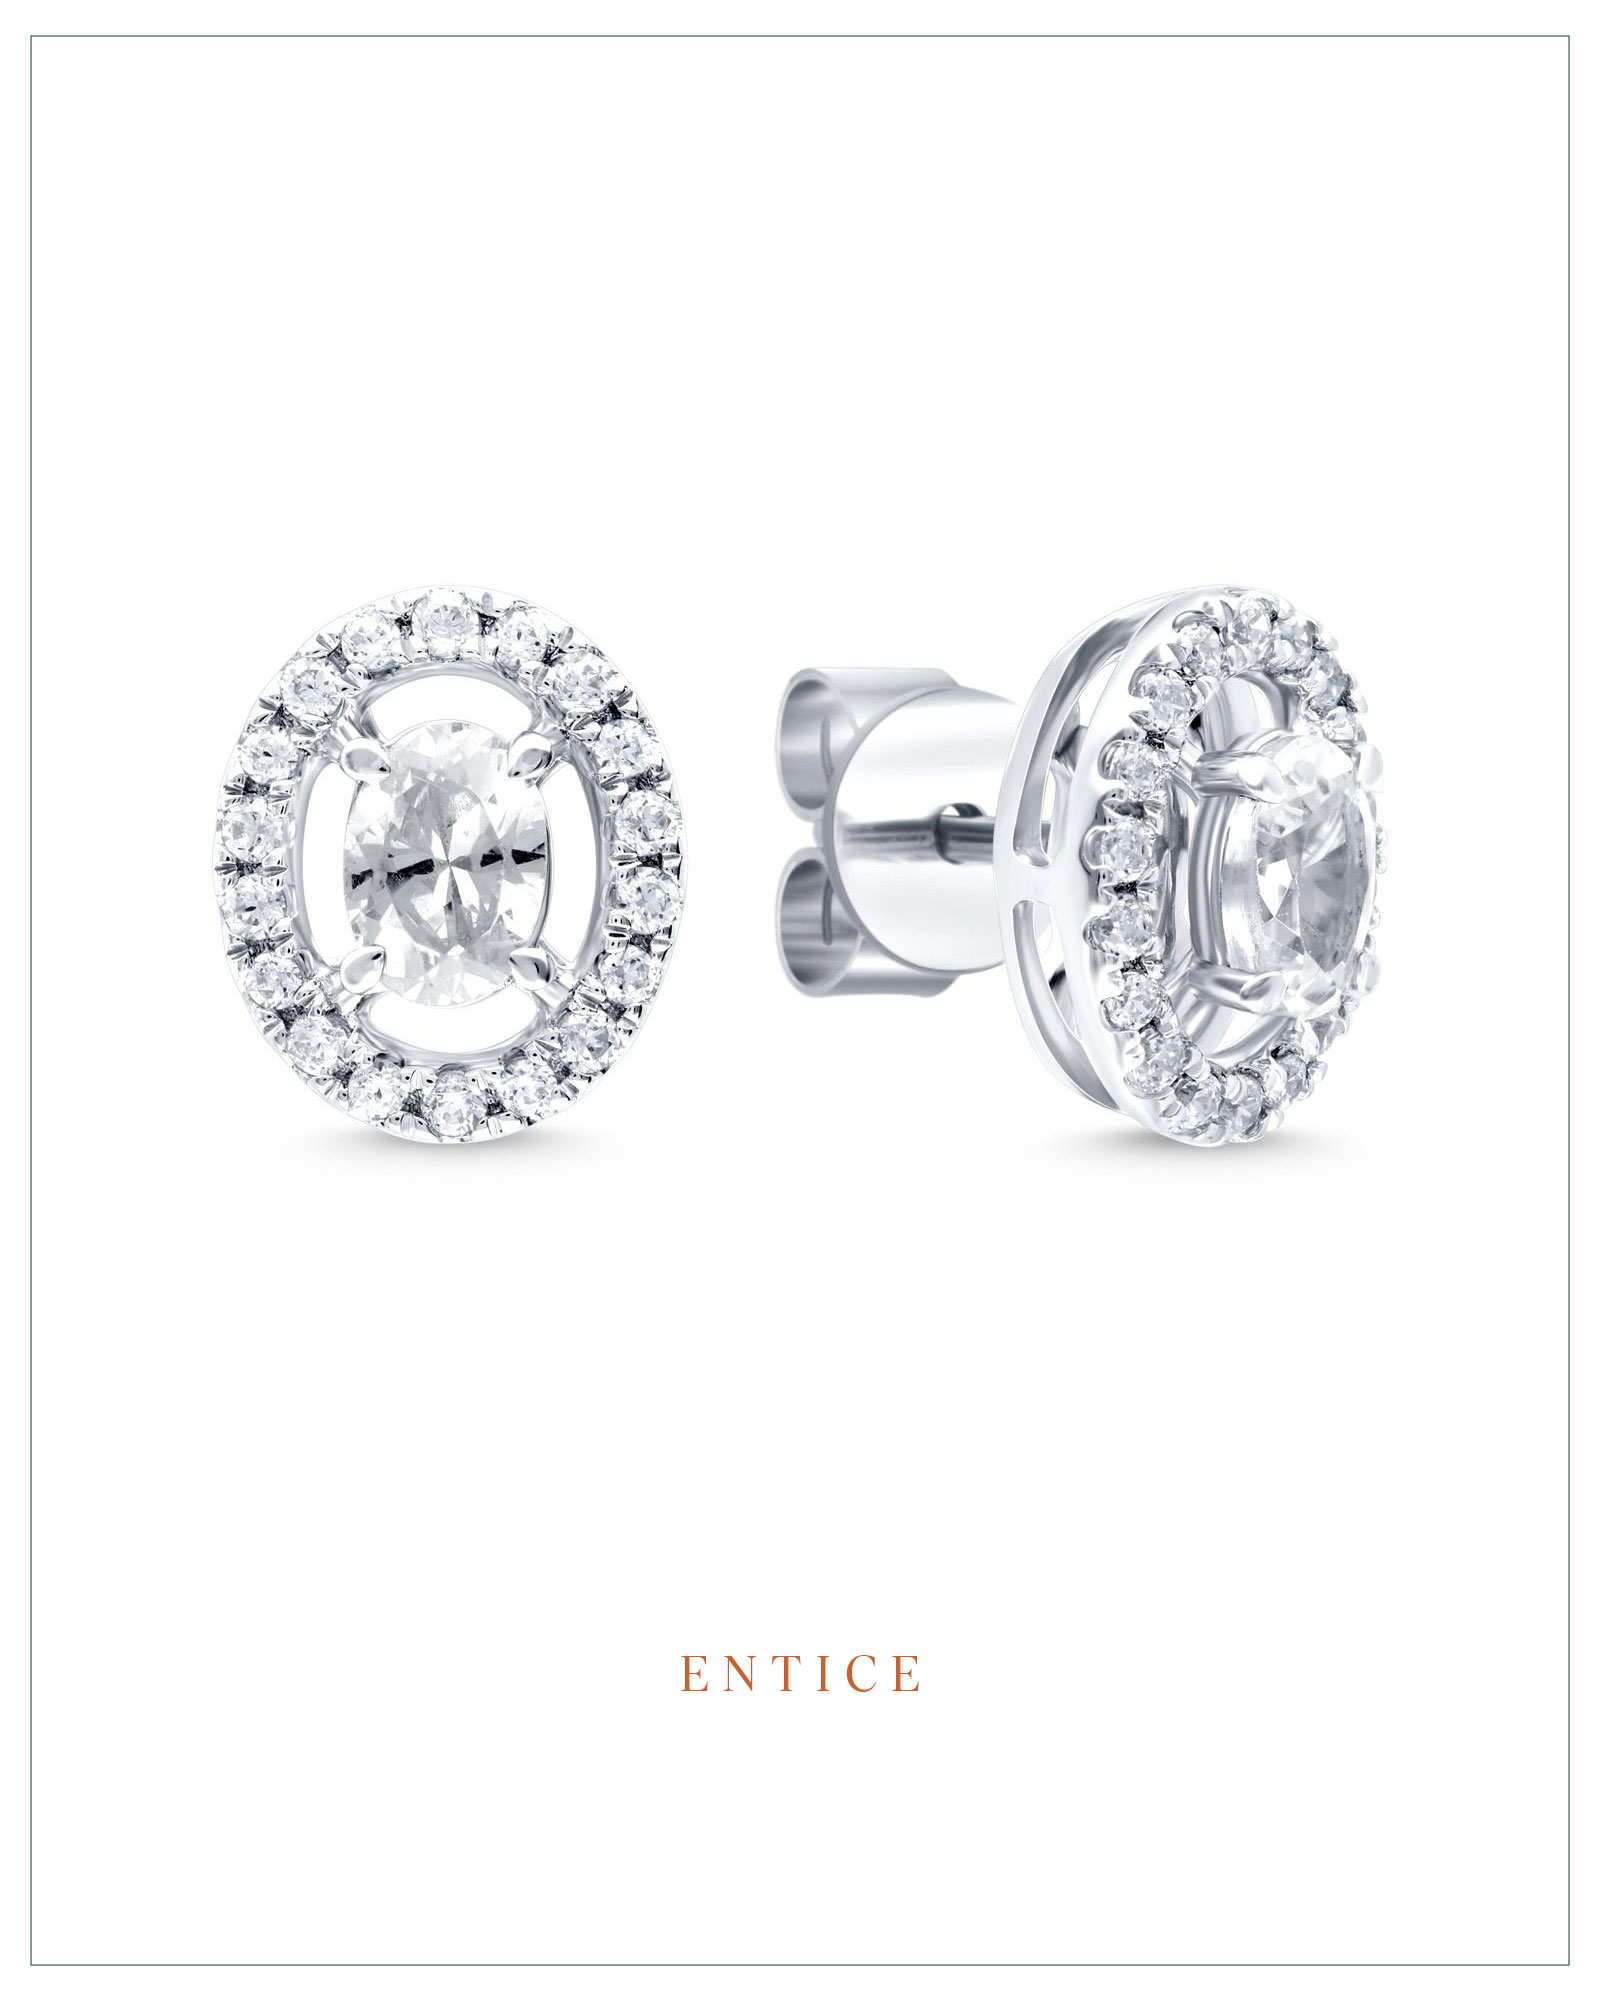 Entice oval solitaire diamond earrings with a delicate diamond halo